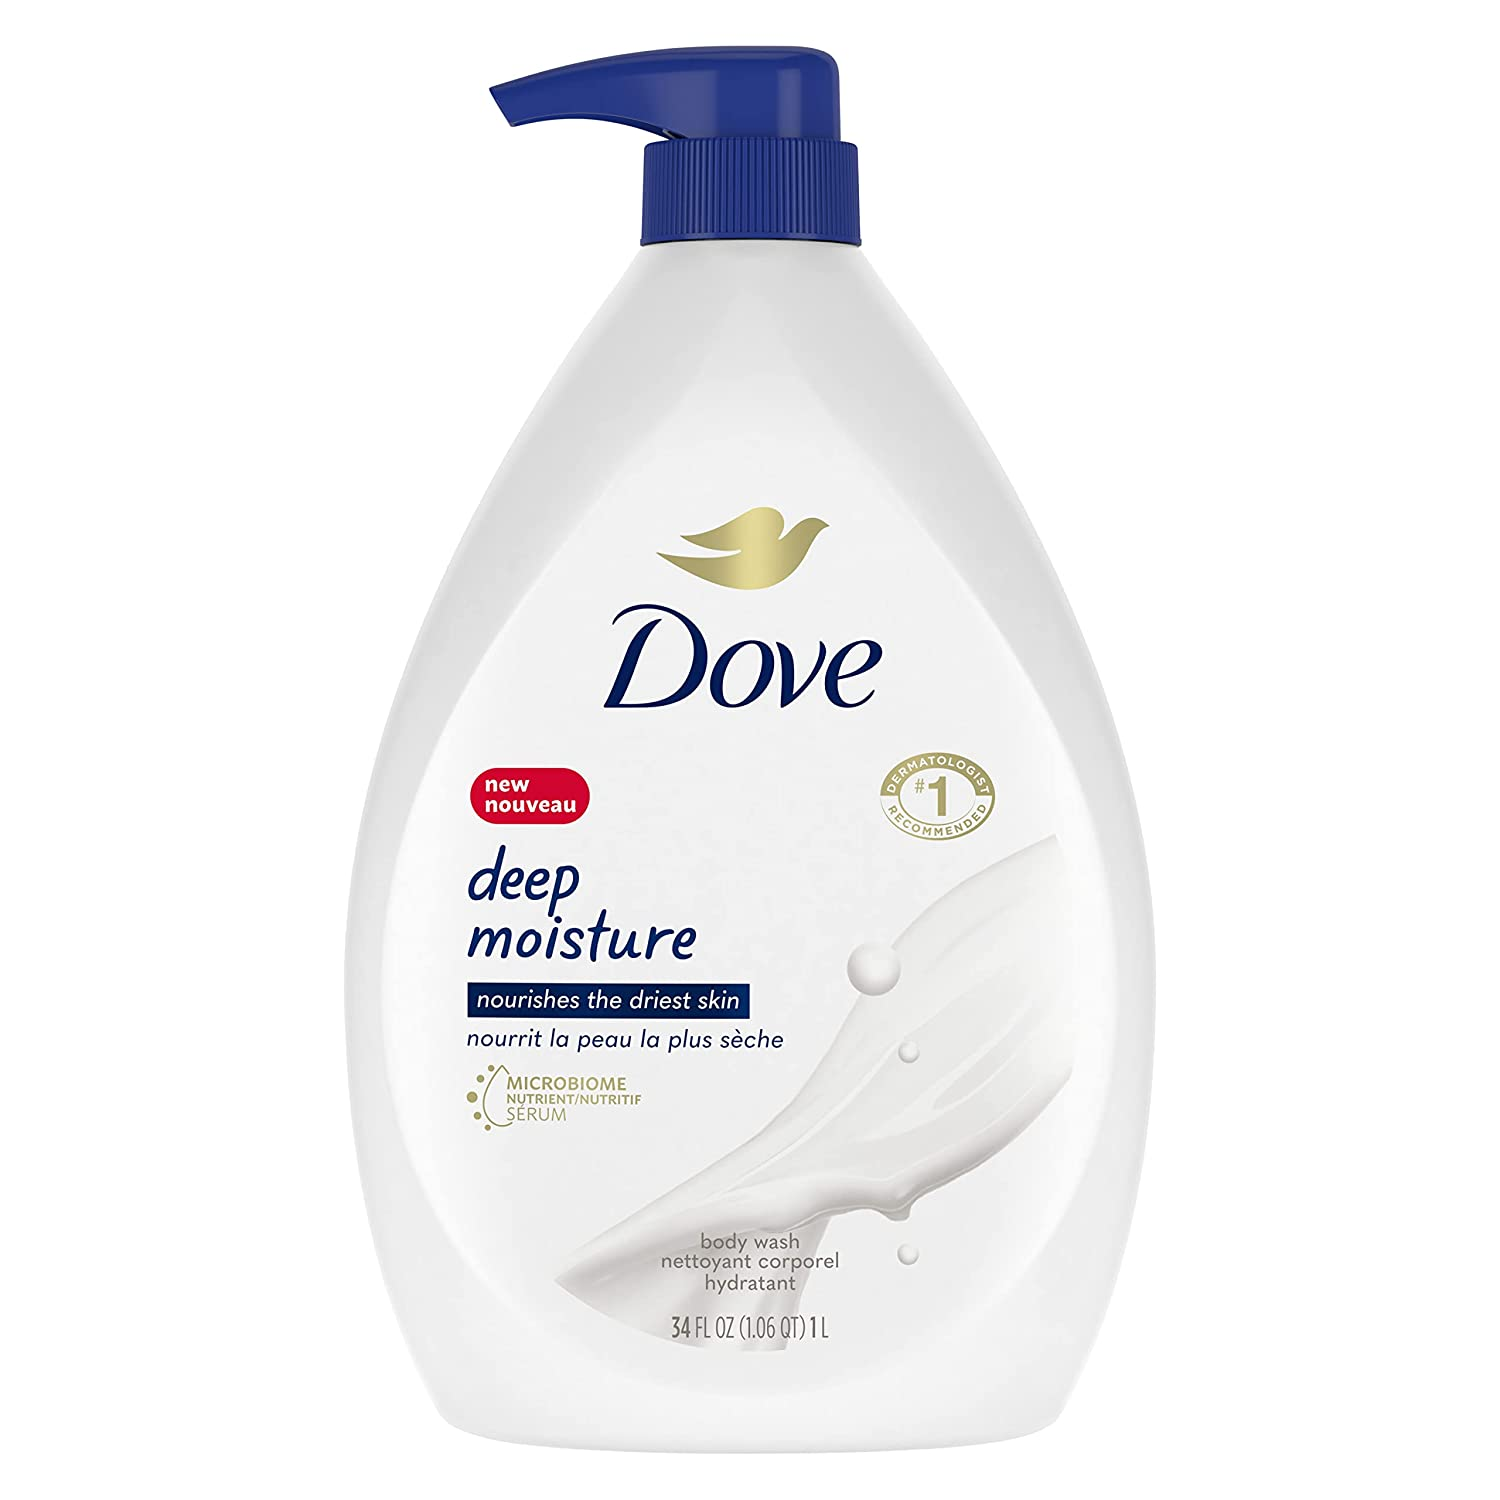 Dove Body Wash with Pump with Skin Natural Moisturizers Deep Moisture Cleanser - 34 oz $7.48